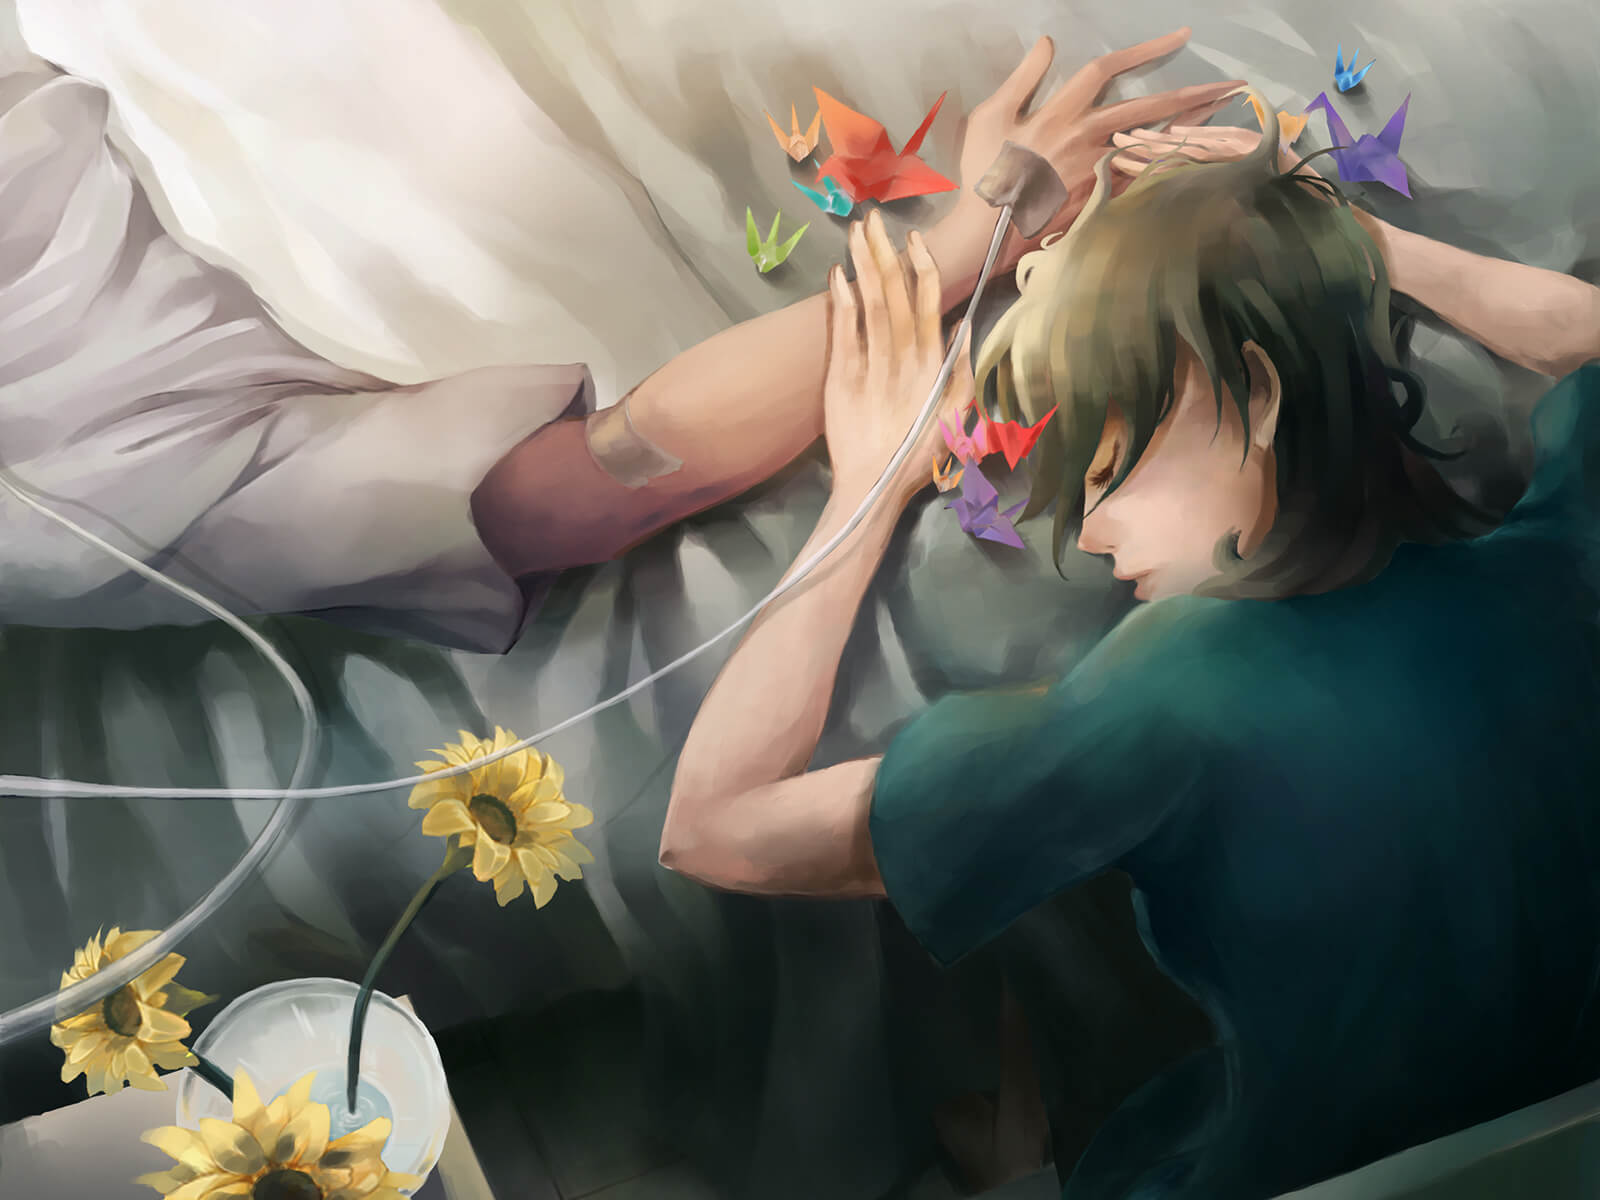 A girl rests her head against an arm of a person in a hospital bed, with several brightly colored paper cranes nearby.